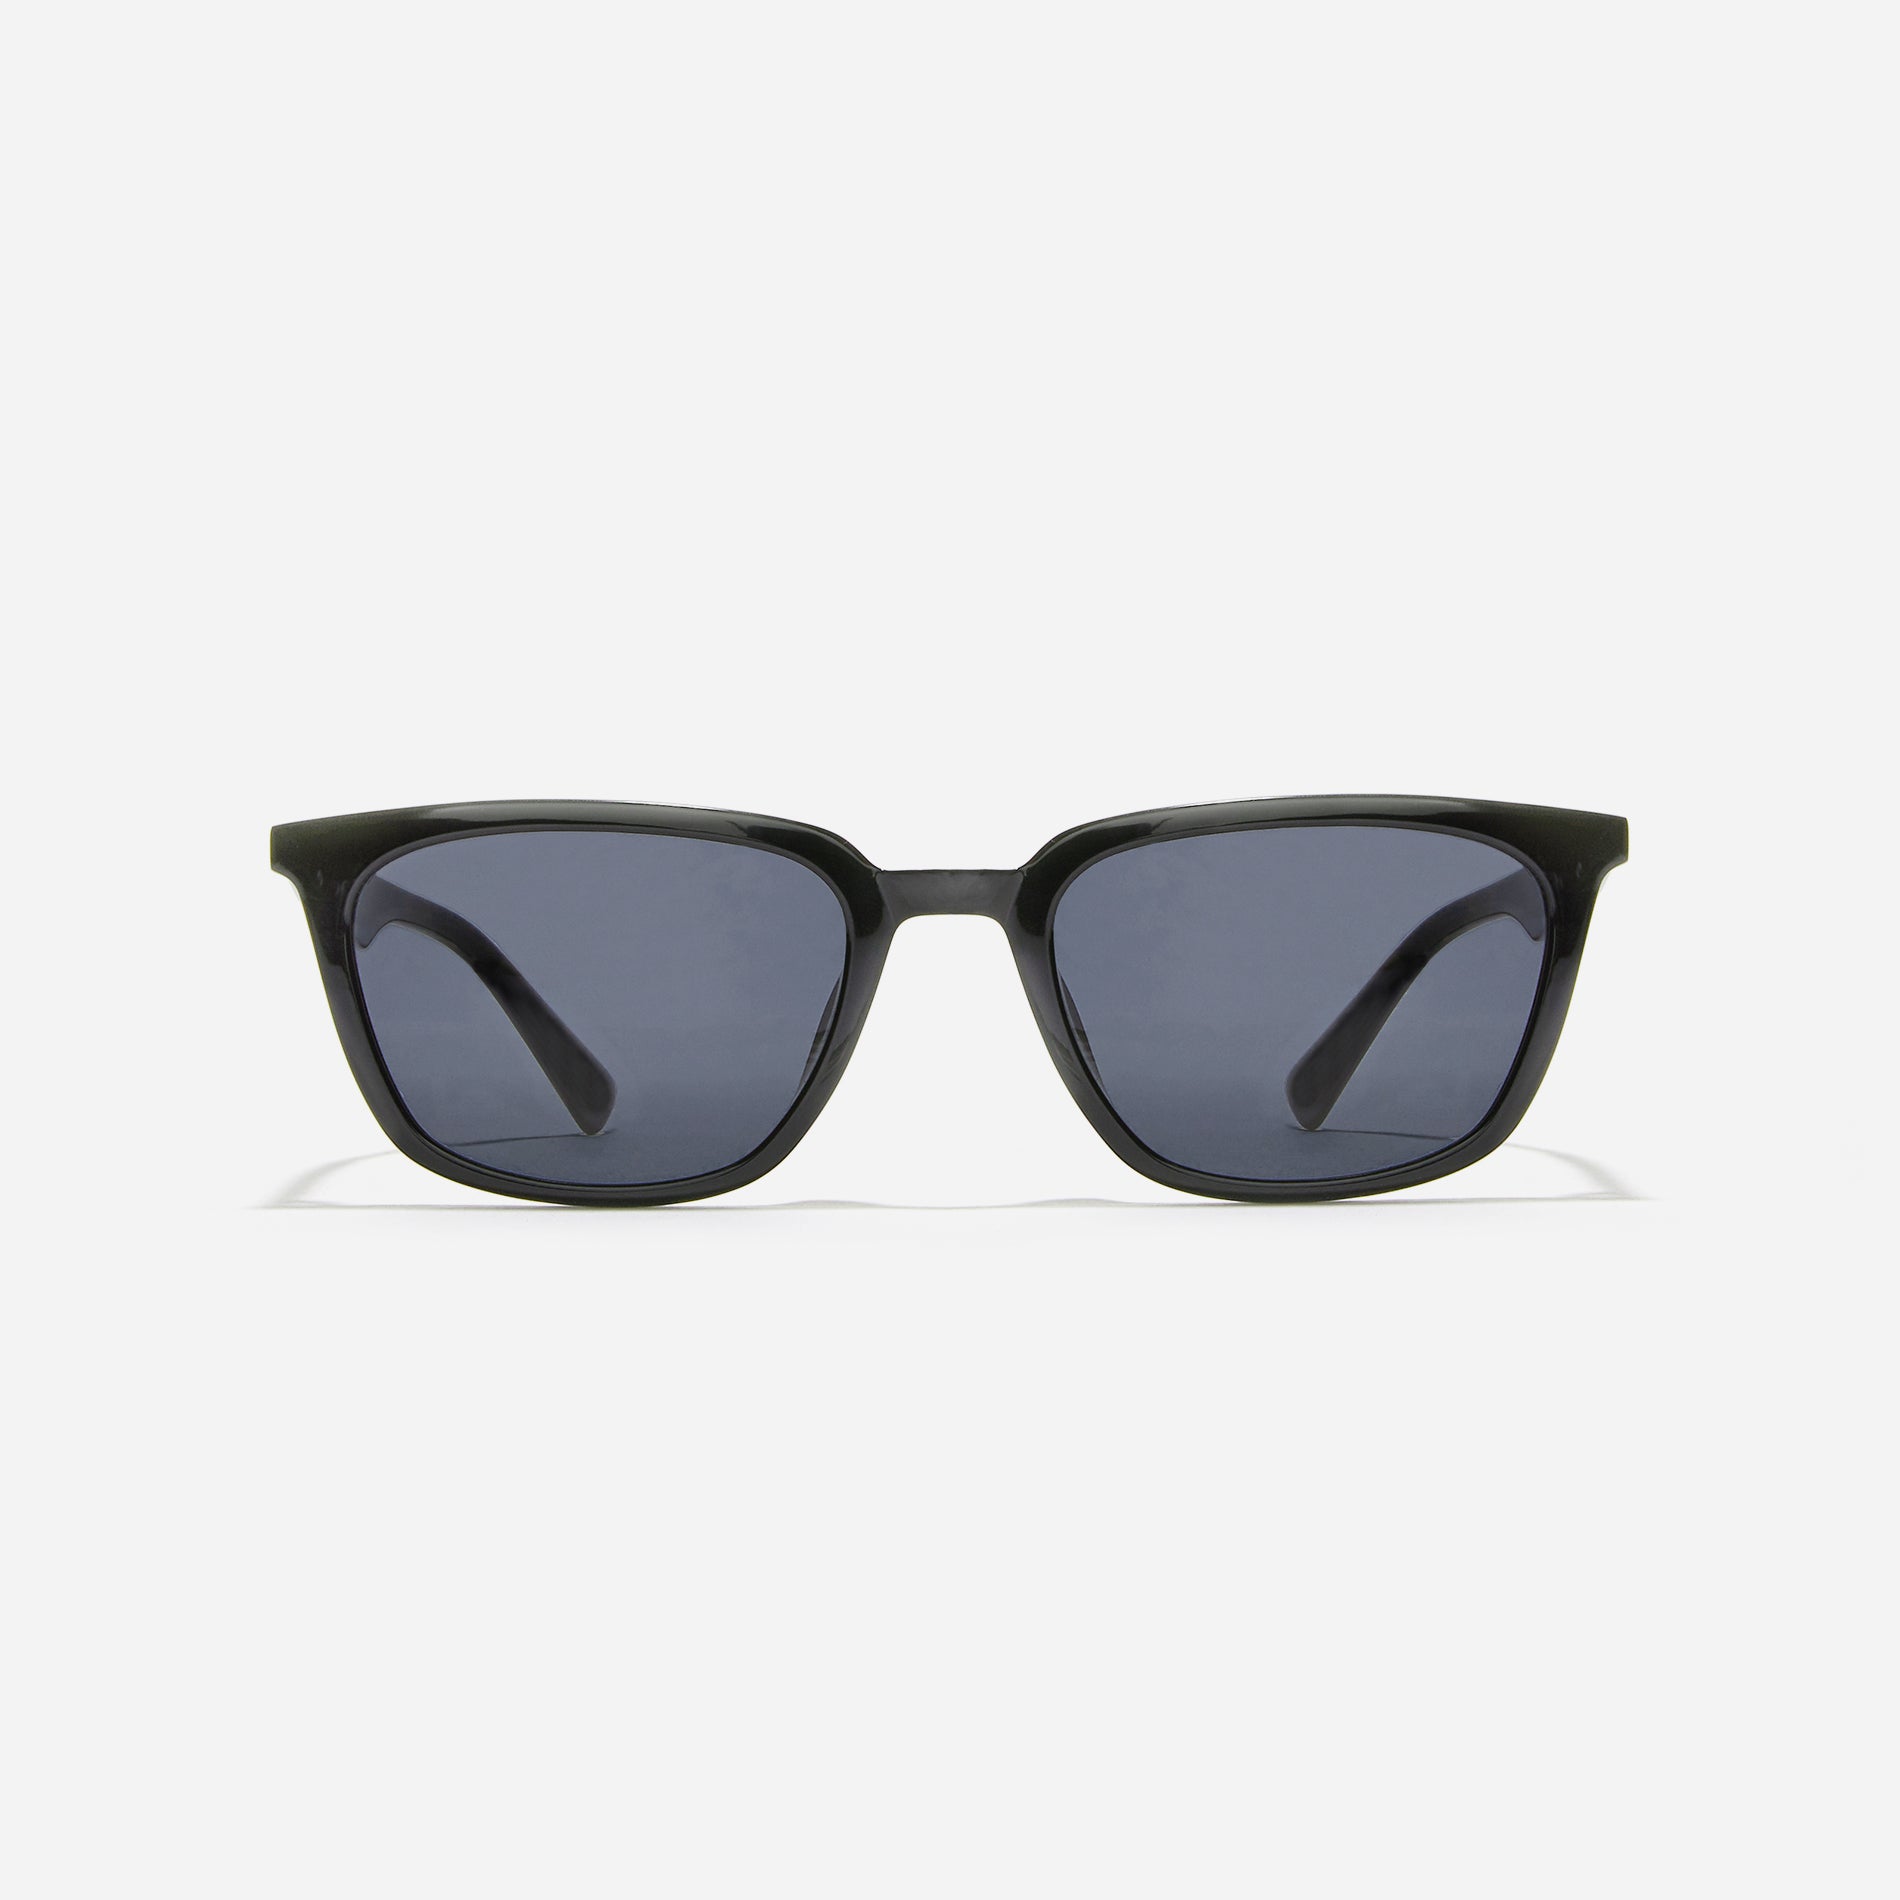 Square-shaped petite frame sunglasses. They feature a sleek, narrow, retro-inspired design from the 80s, reinterpreted with a modern touch. The distinctive narrow rim shape exudes a chic and contemporary vibe. Additionally, soft color variations effortlessly complement various face shapes,